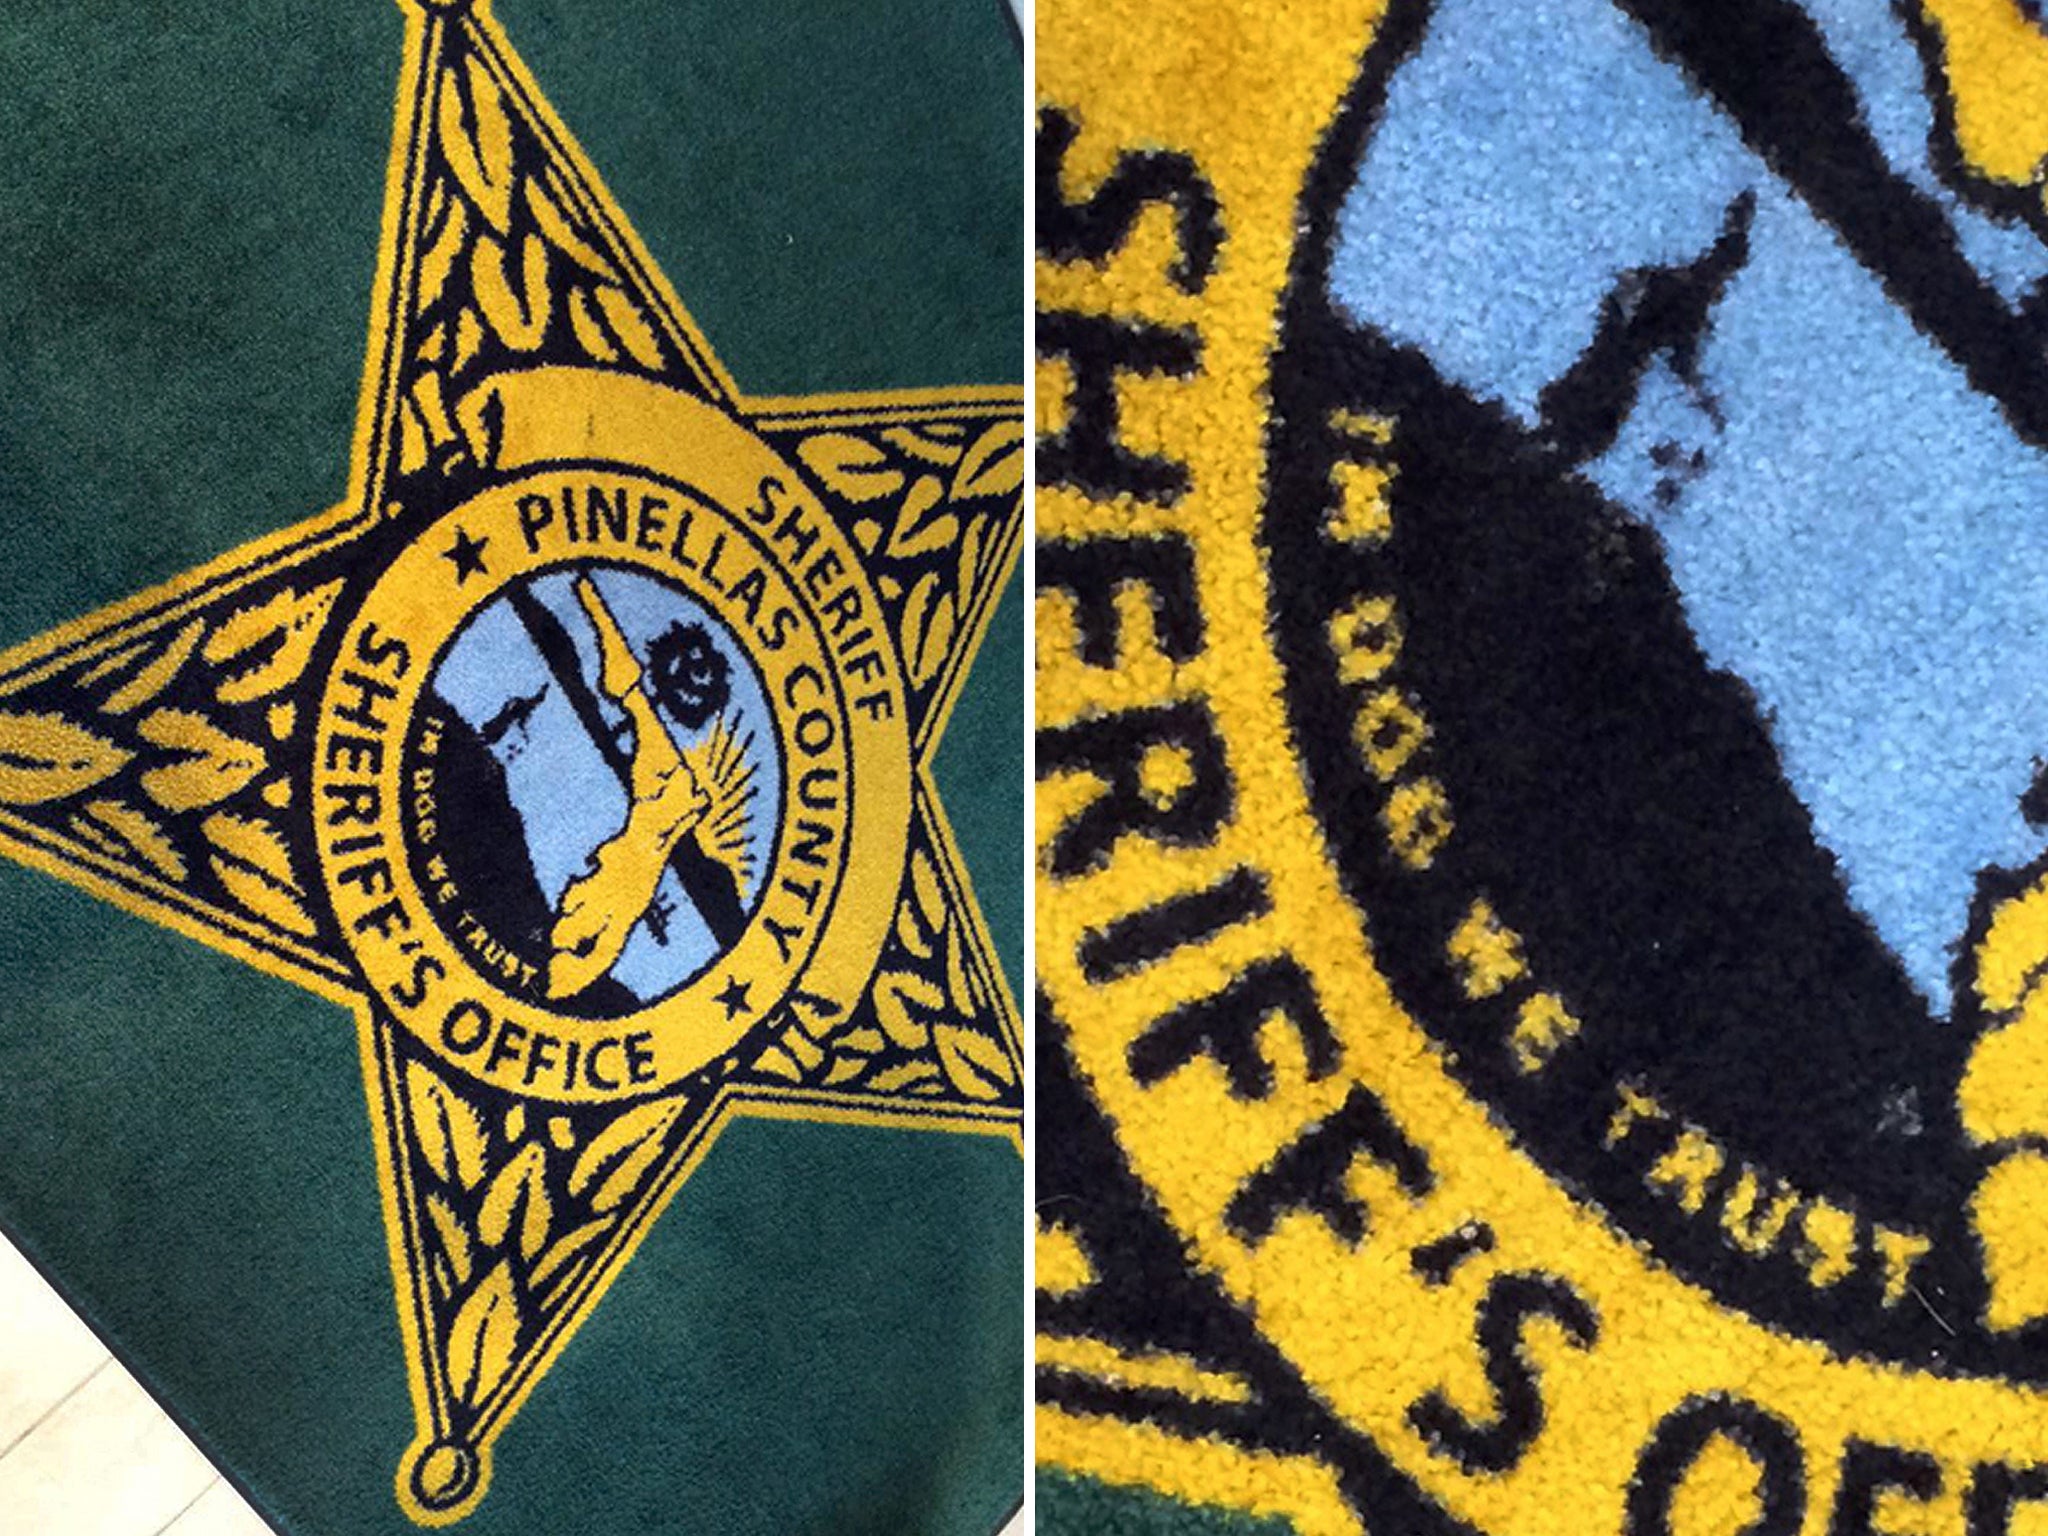 The Pinellas County Sheriff's Office rug in Largo, Florida